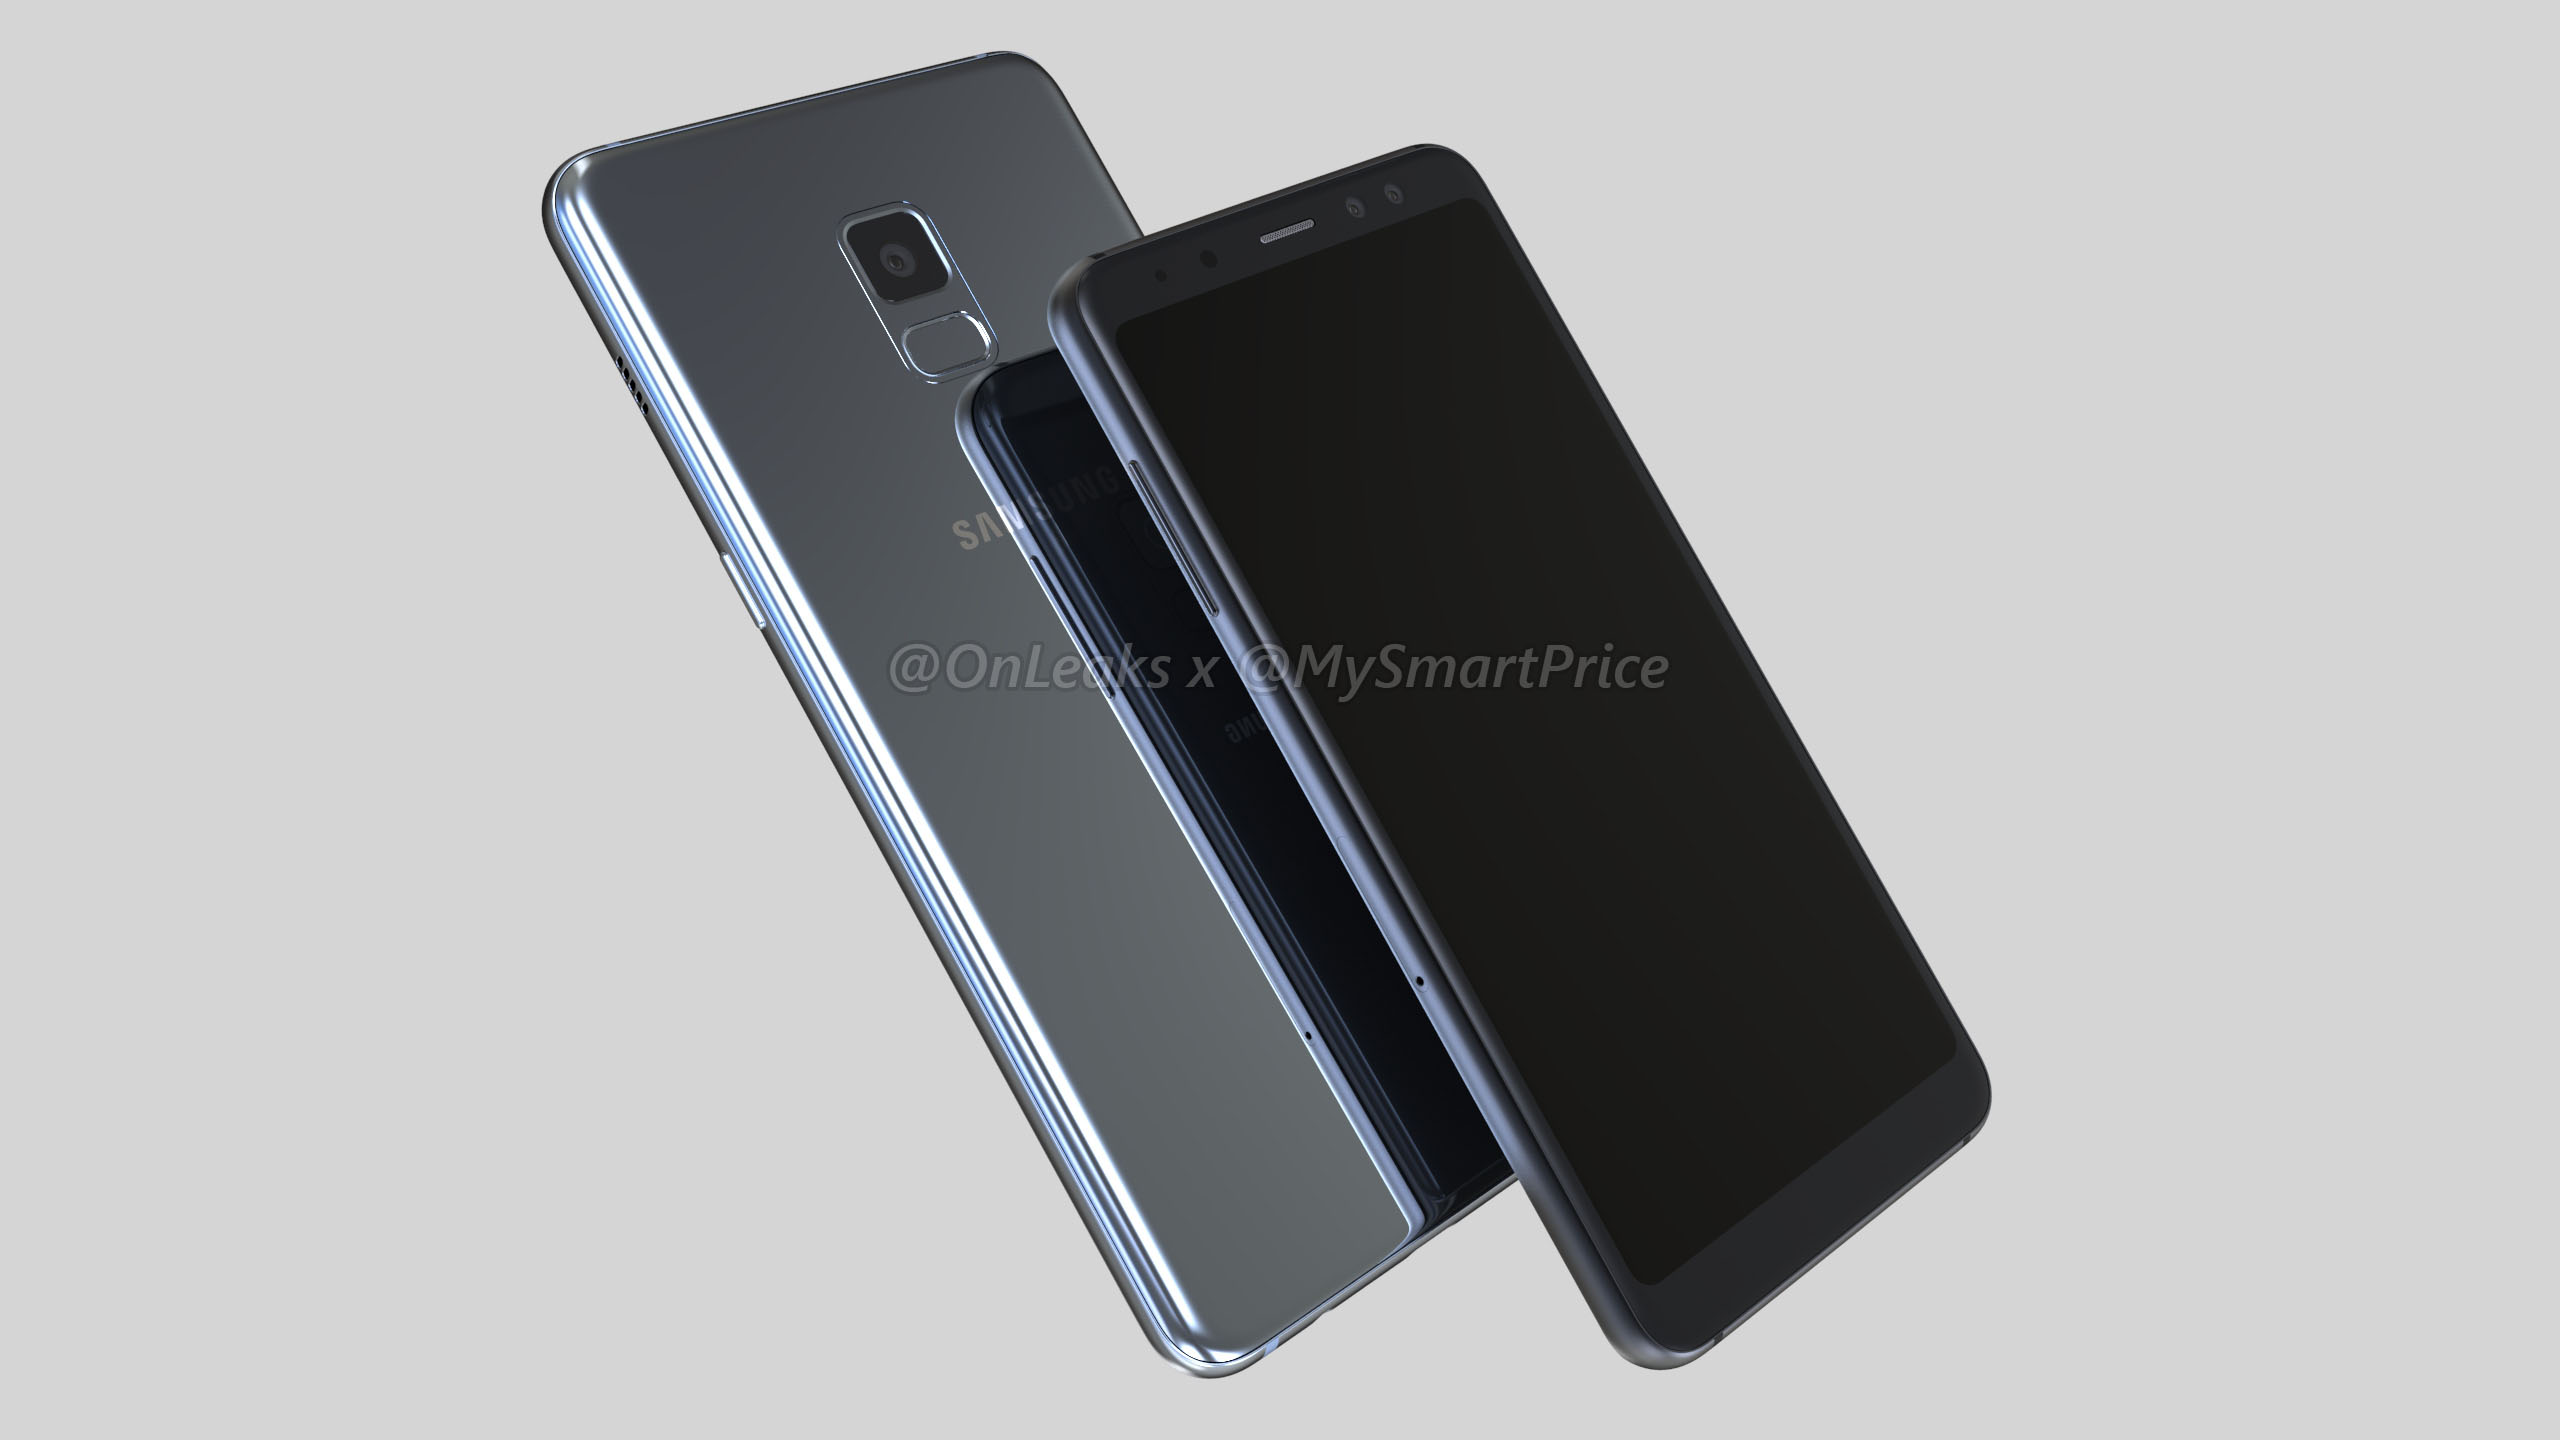 Samsung Galaxy A5 (2018) and Galaxy A7 (2018) renders, specs surface 1